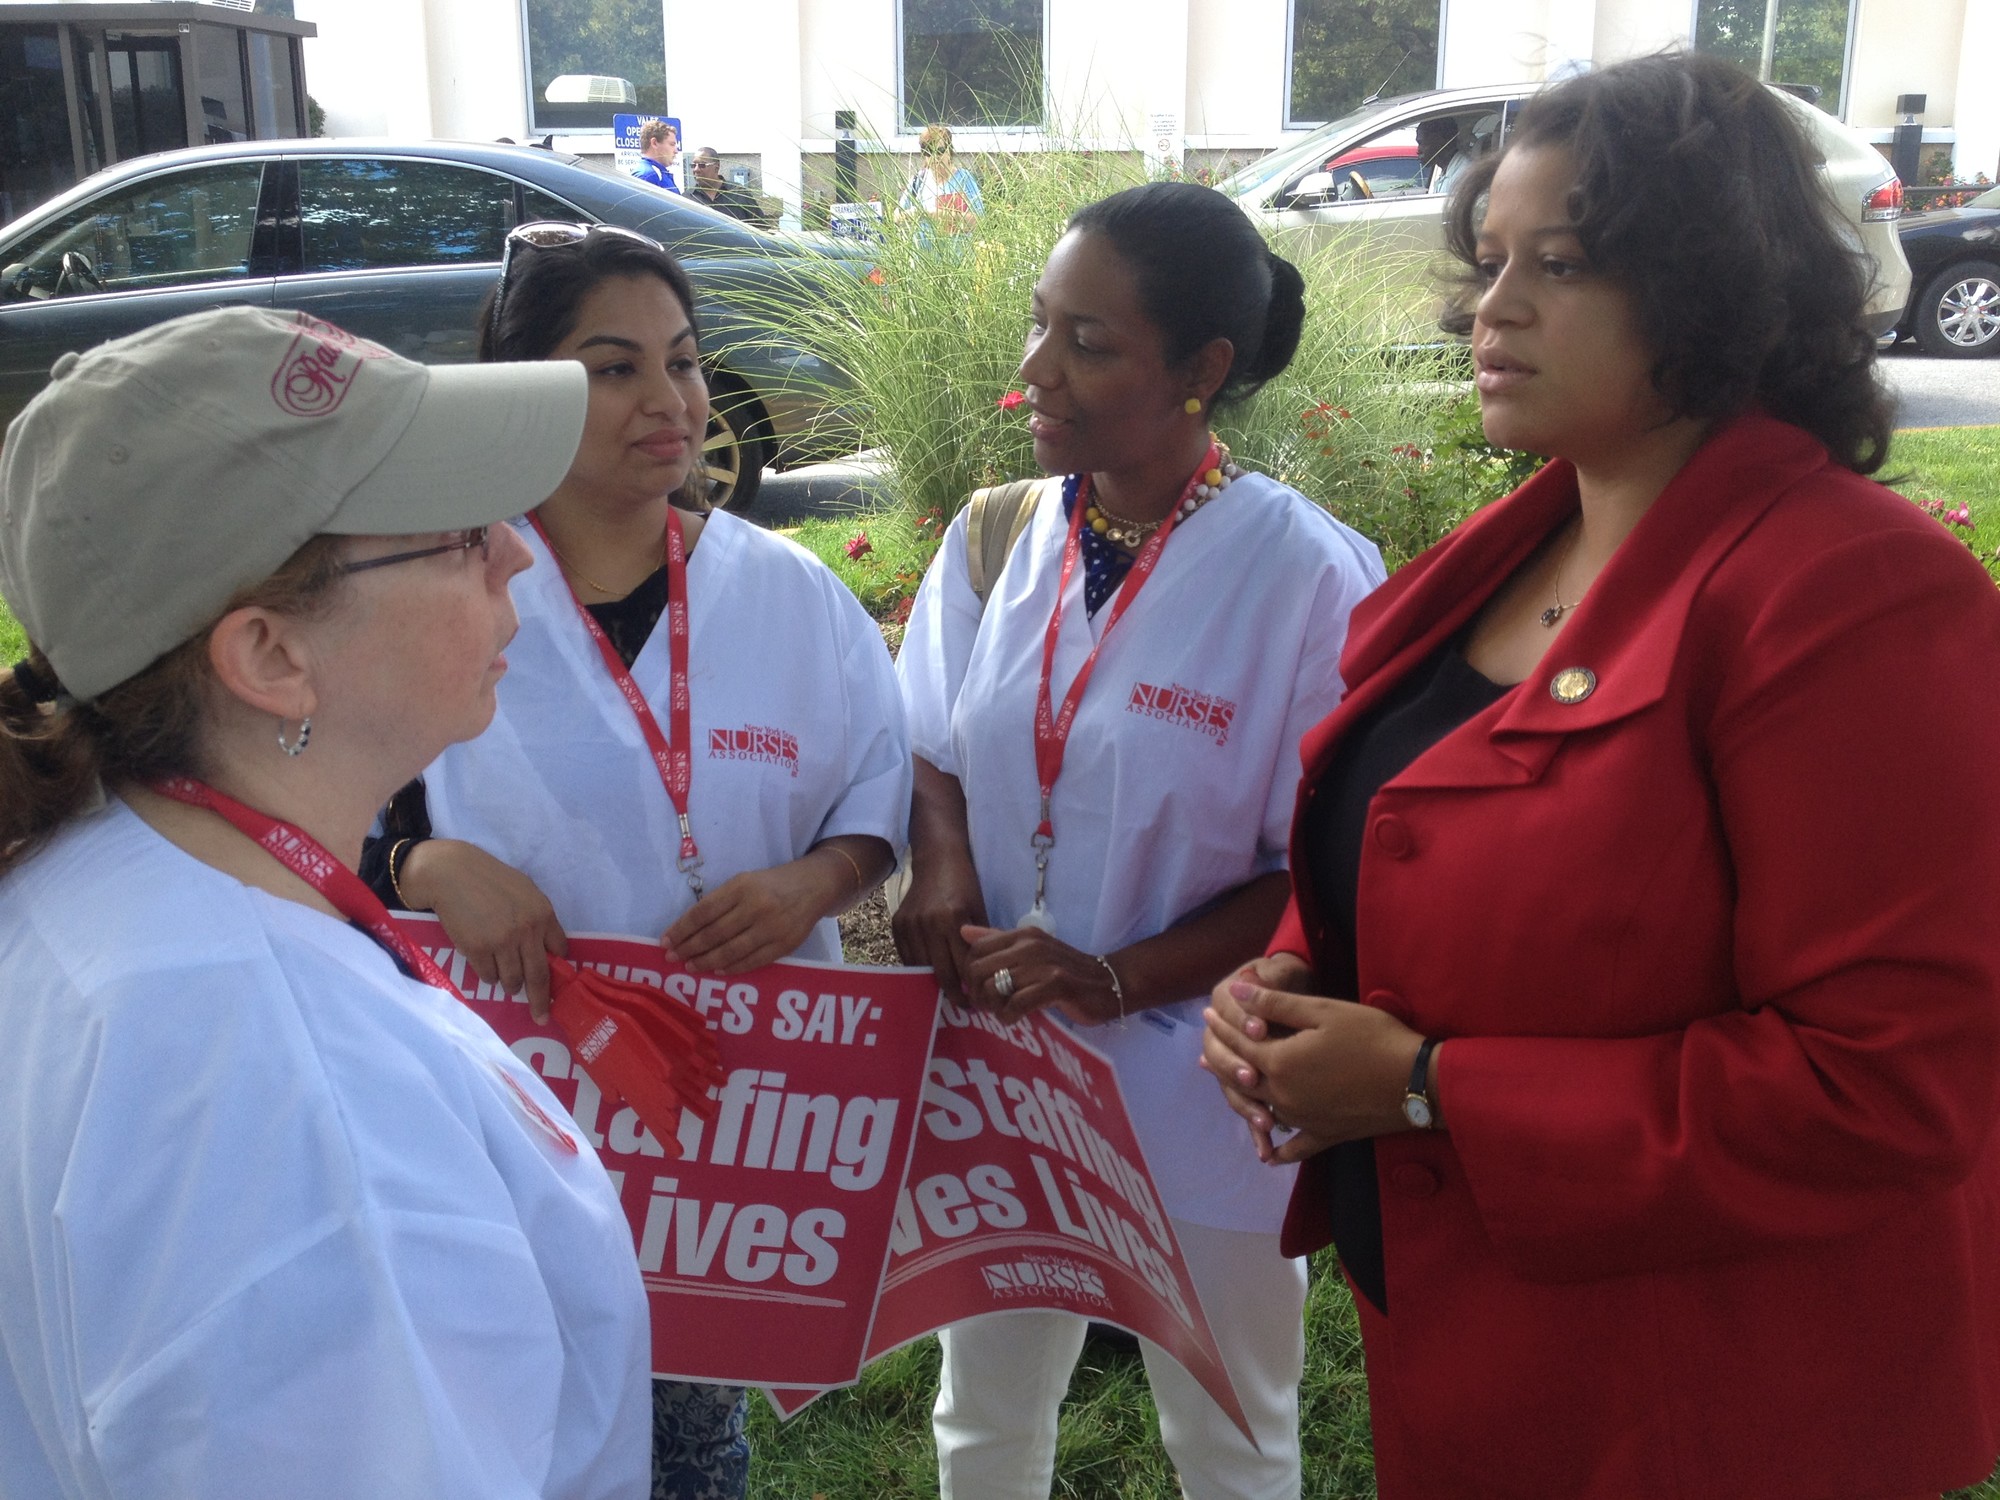 Assemblywoman Michelle Solages chatted with the protesting nurses